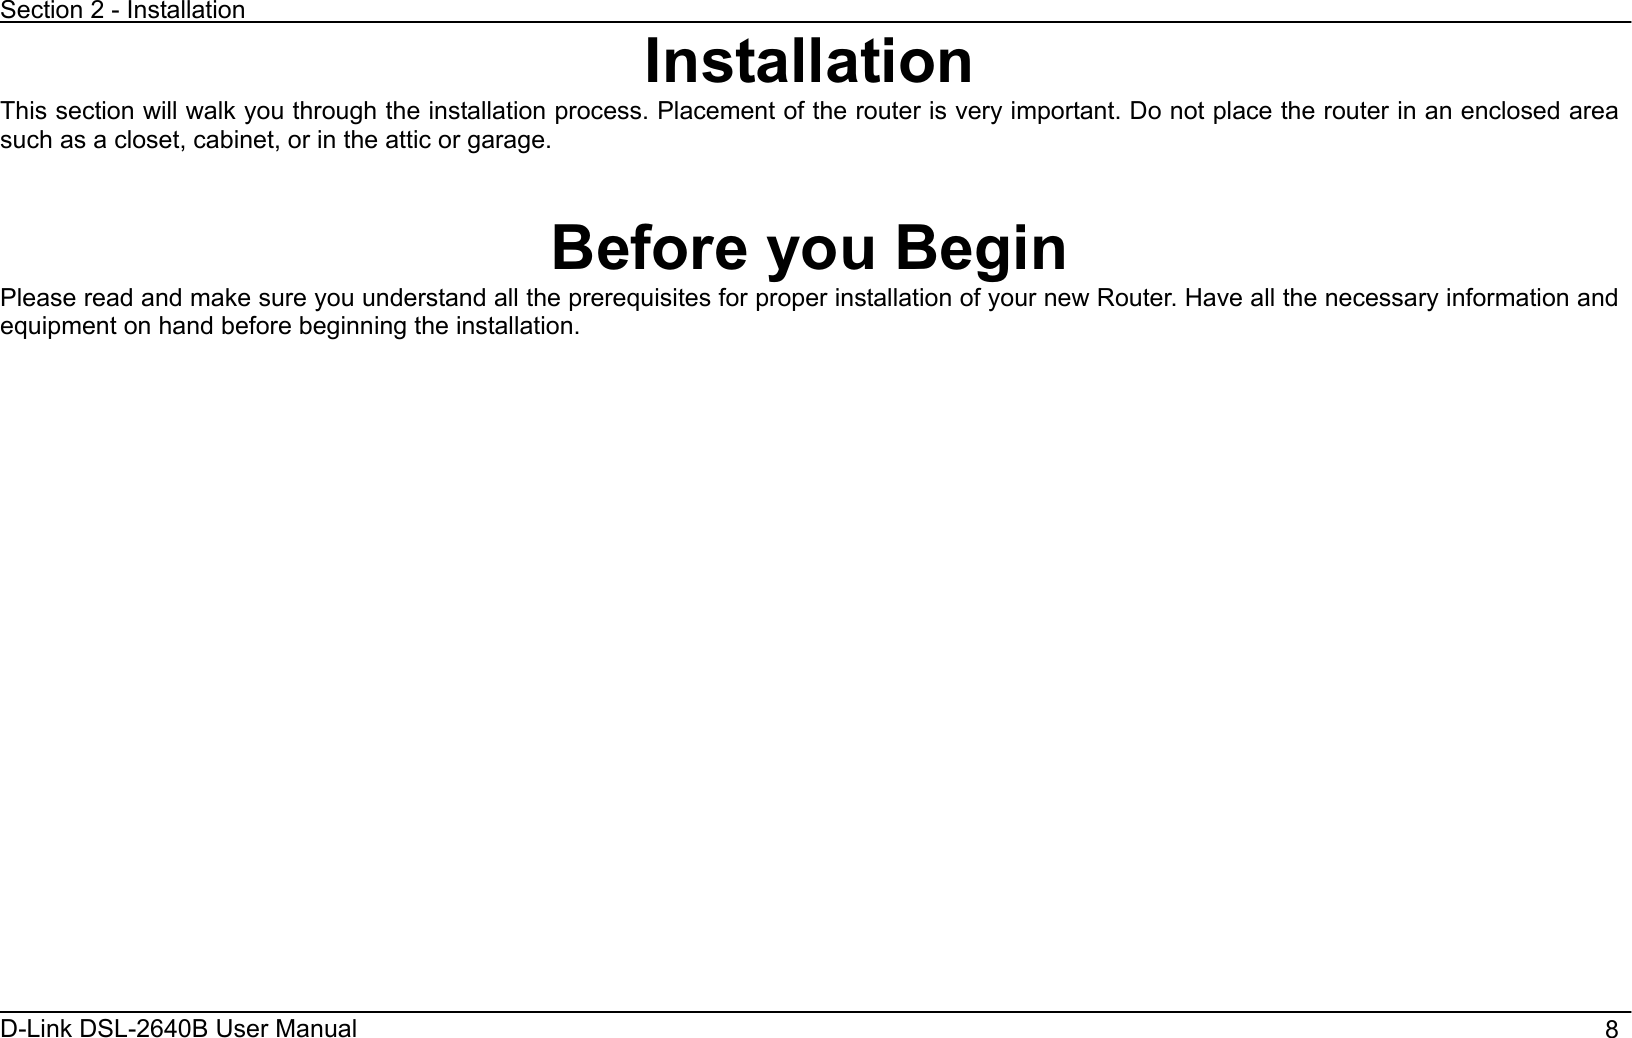 Section 2 - Installation D-Link DSL-2640B User Manual                                       8InstallationThis section will walk you through the installation process. Placement of the router is very important. Do not place the router in an enclosed area such as a closet, cabinet, or in the attic or garage. Before you Begin Please read and make sure you understand all the prerequisites for proper installation of your new Router. Have all the necessary information and equipment on hand before beginning the installation. 